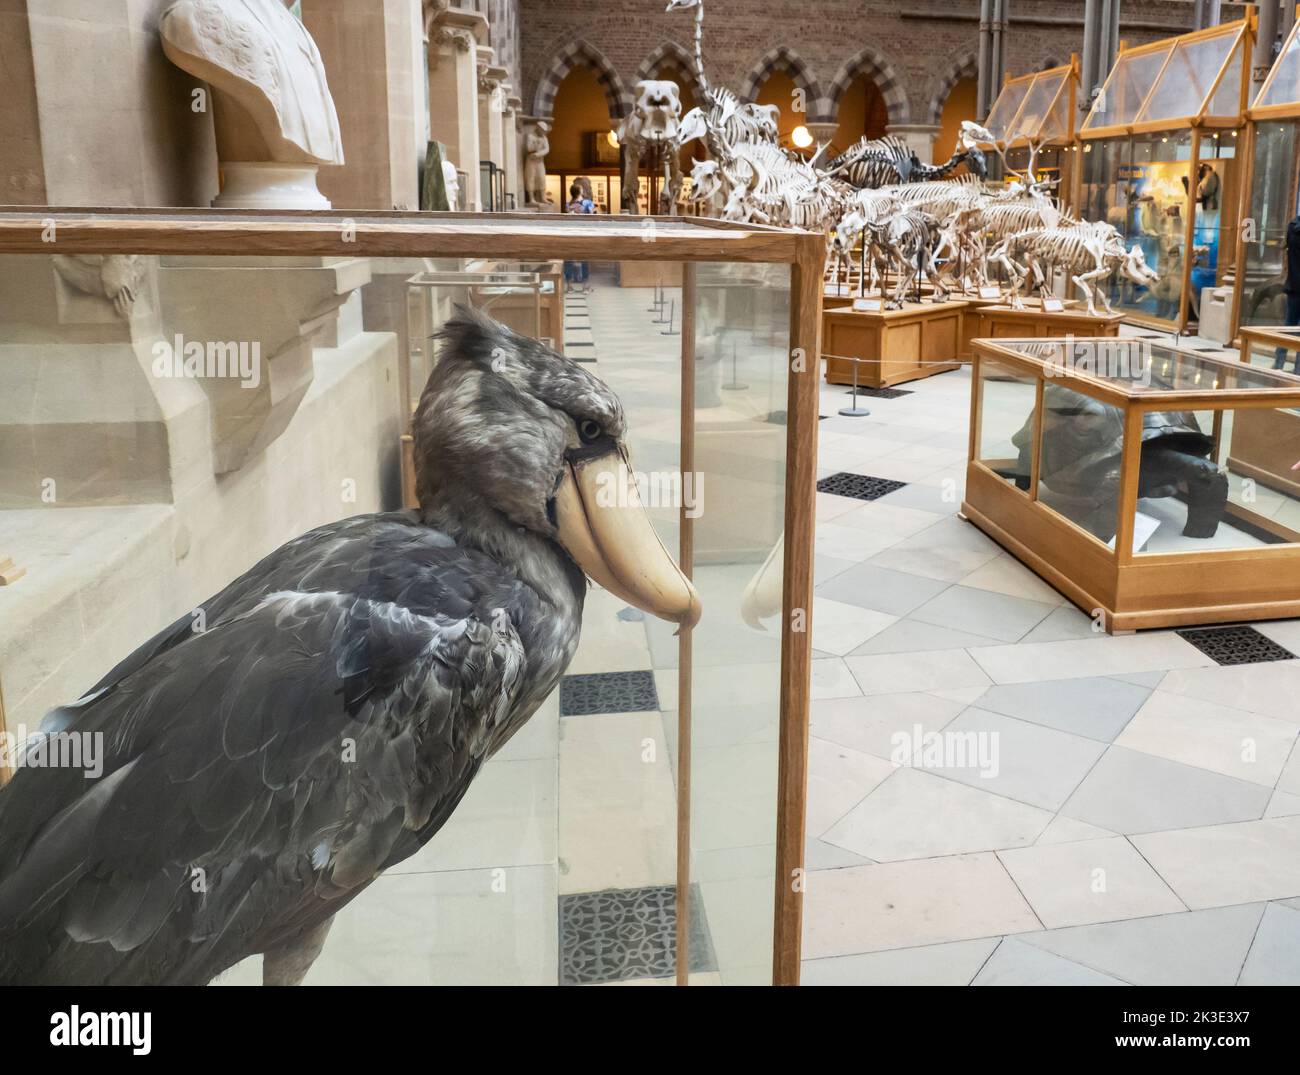 A Shoebill Stork, Balaeniceps rex in the Oxford University Museum of Natural History, Oxford, Oxfordshire, UK. Stock Photo